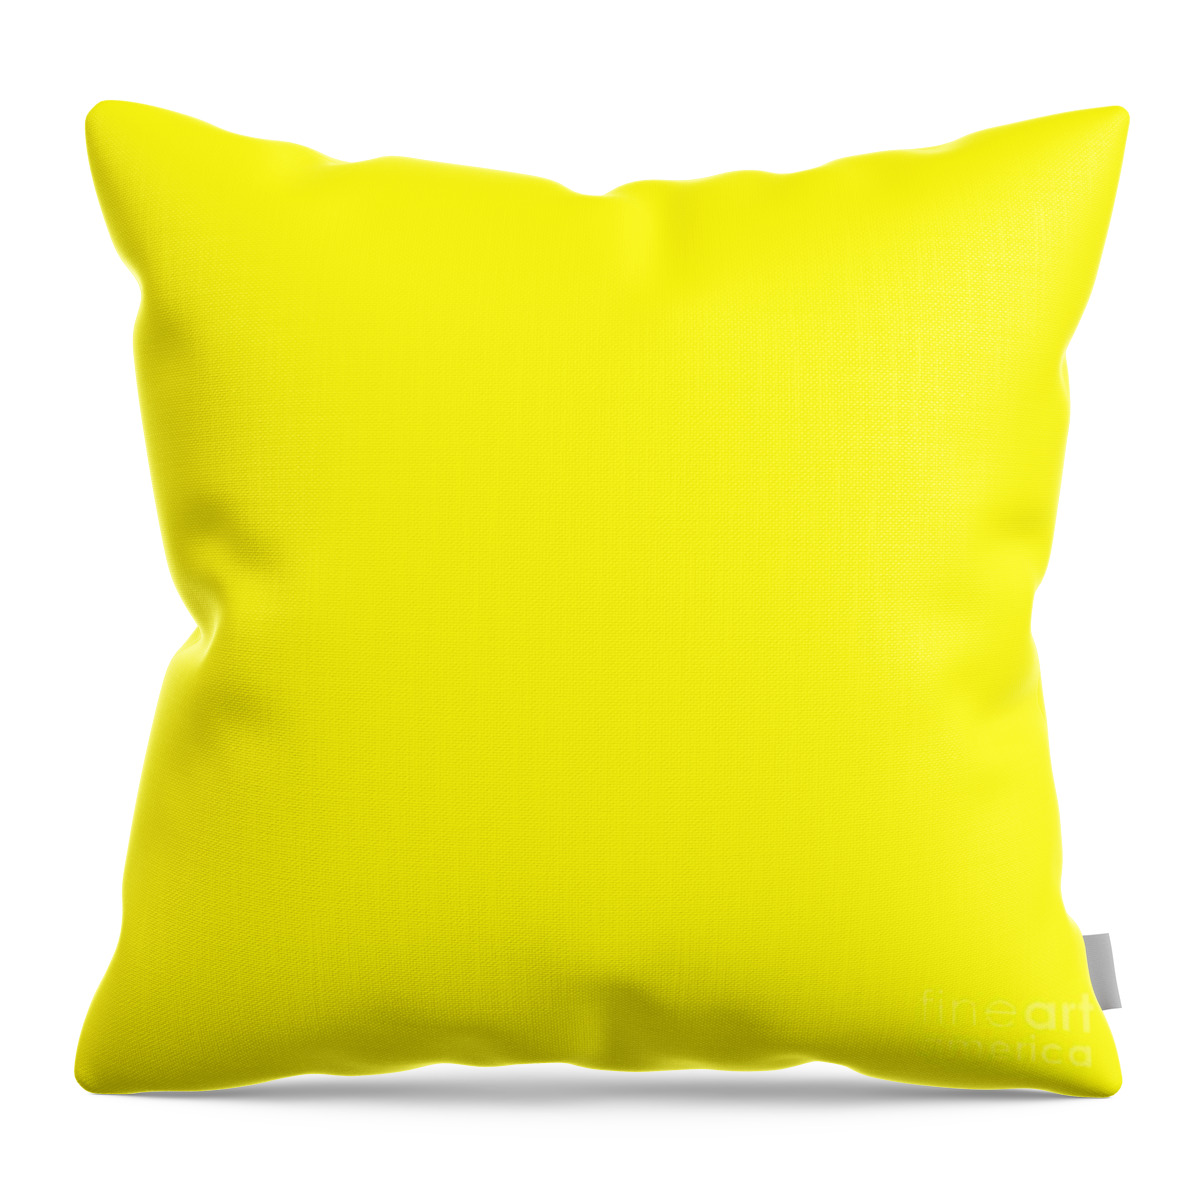 Mustard Throw Pillow featuring the digital art Perspective by Wade Hampton